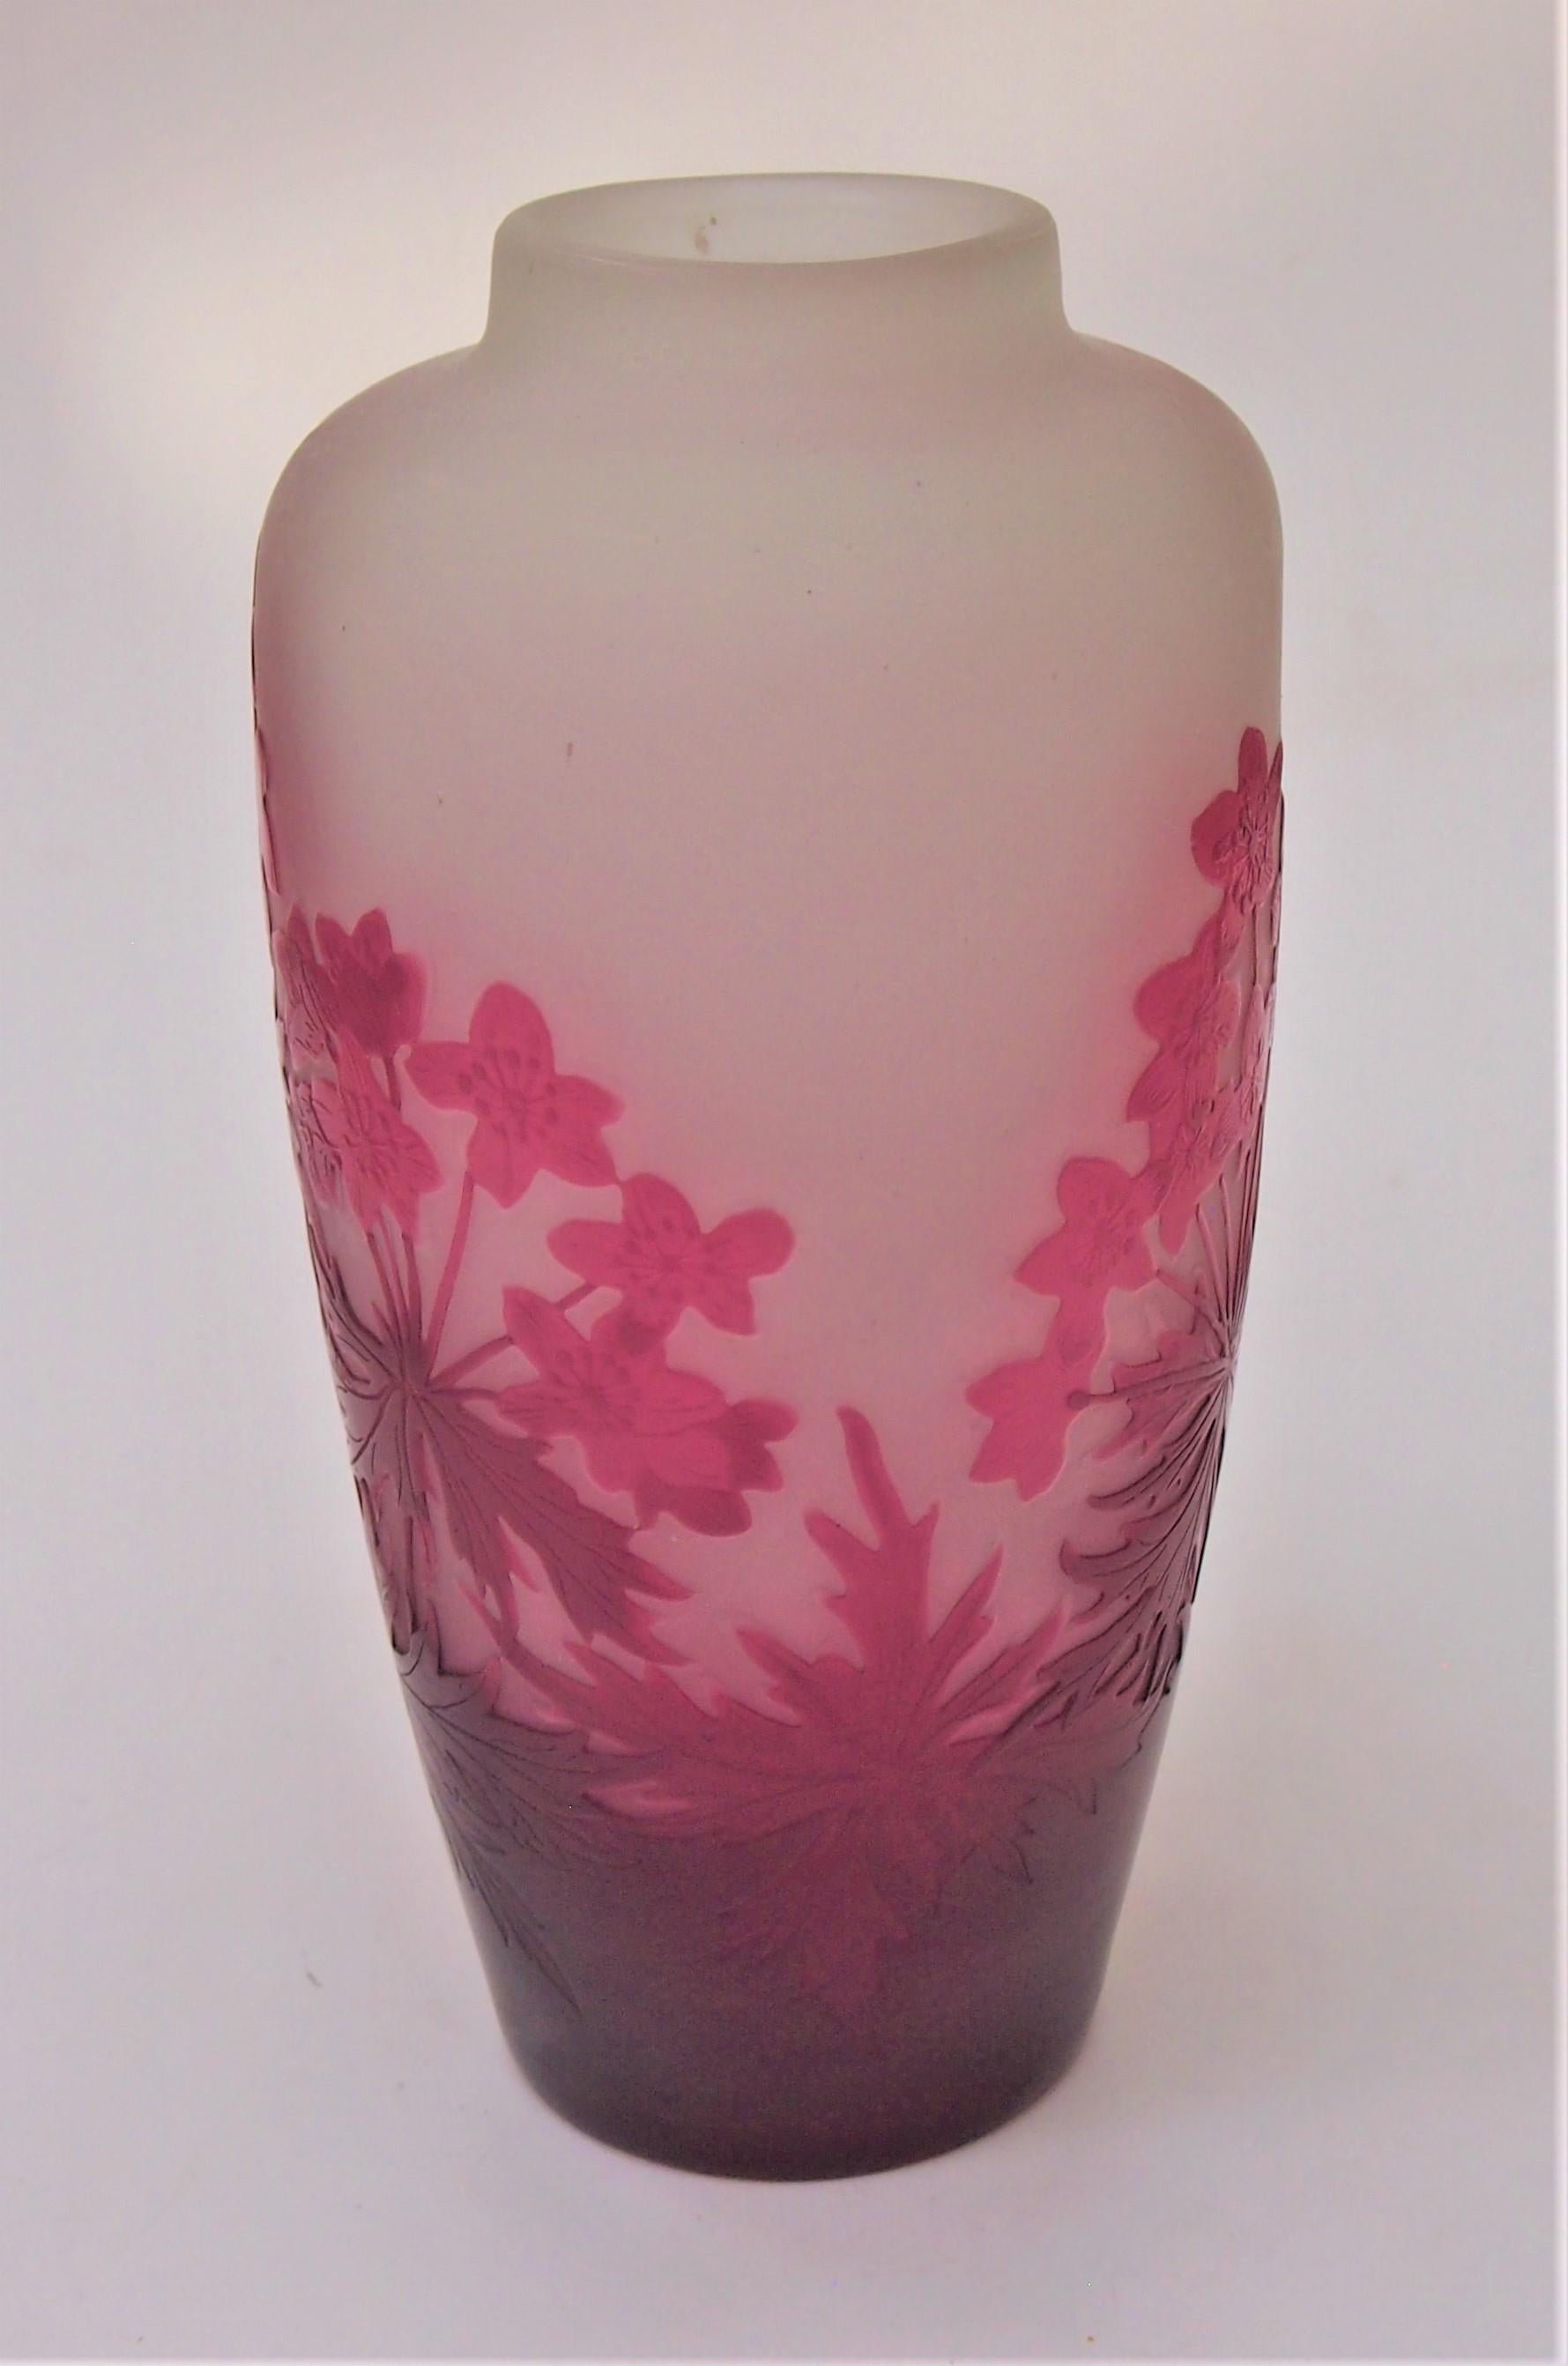 Beautiful signed French Art Nouveau Emile Gallé botanical cameo vase depicting flowers in reds over frosted clear. A good size; the oval profile vase has mostly clear shoulders with a short raised neck making a quite dramatic effect - a classic